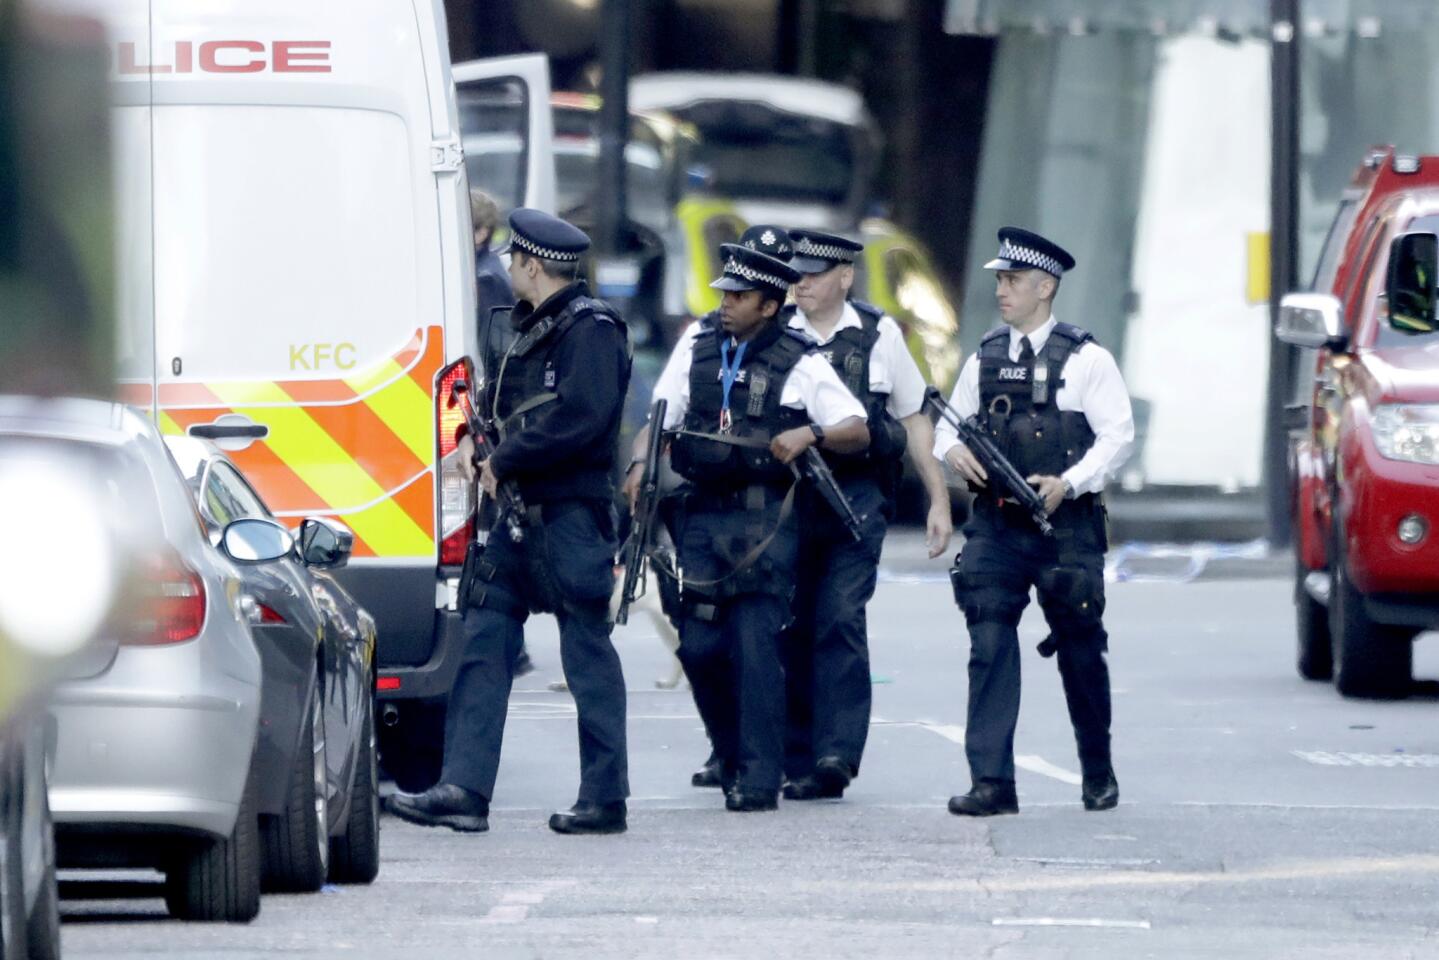 Armed British police work within a cordoned-off area Sunday after the London Bridge attack.